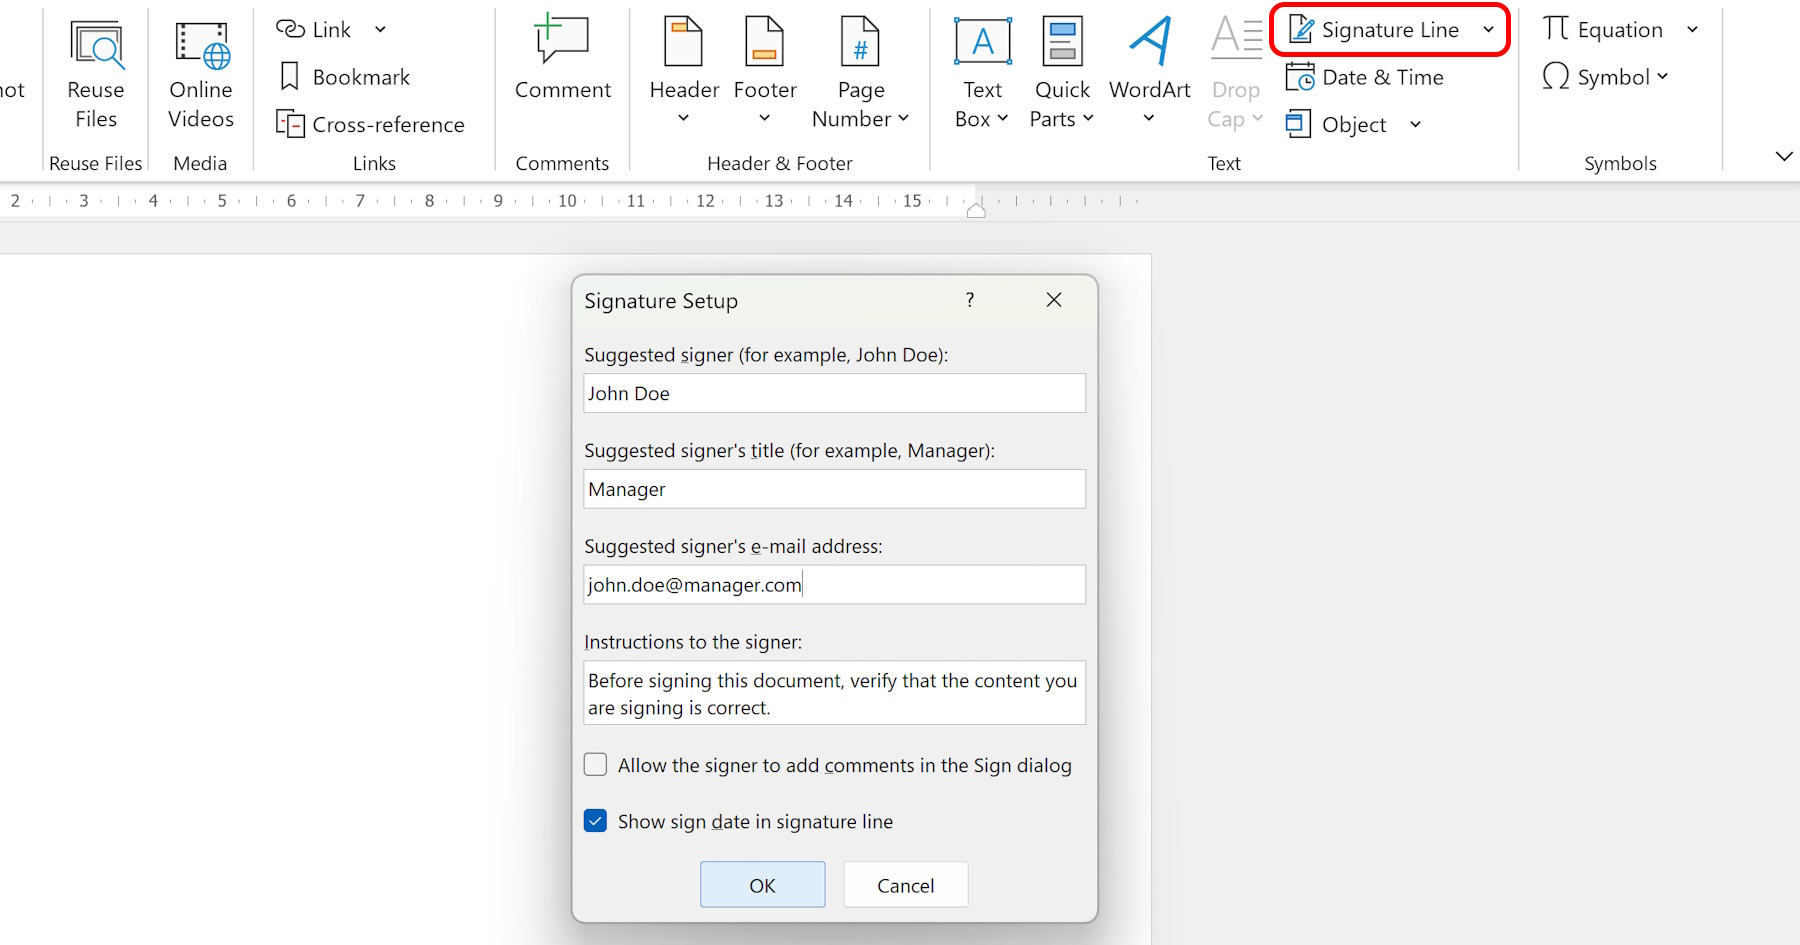 Learn how to create a signature in Word, whether it's a handwritten or digital signature. Add credibility and personalization to your documents with these step-by-step instructions.